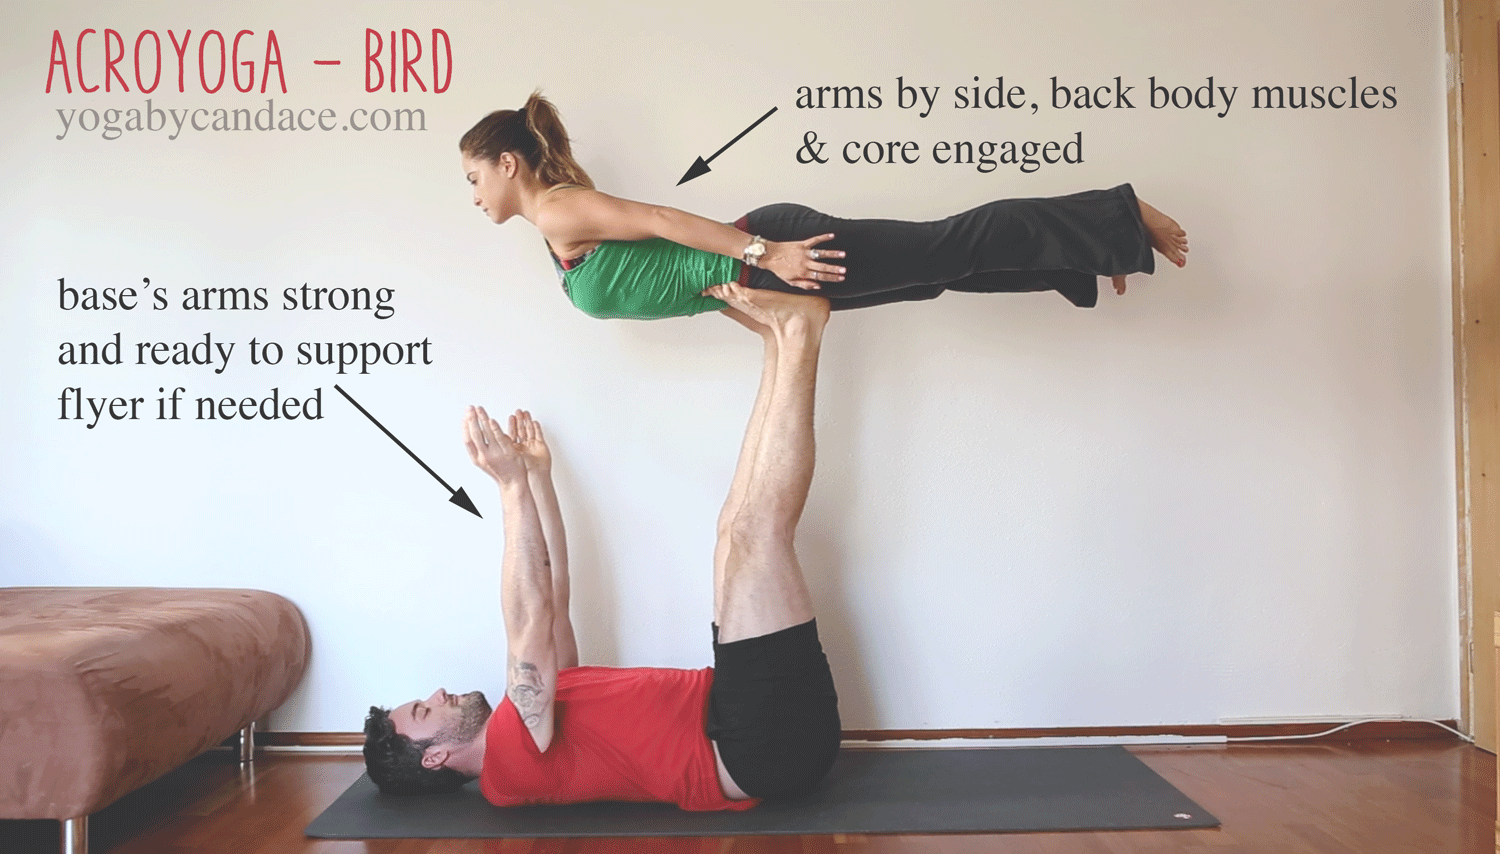 Acro Yoga Poses For Beginners - YouTube